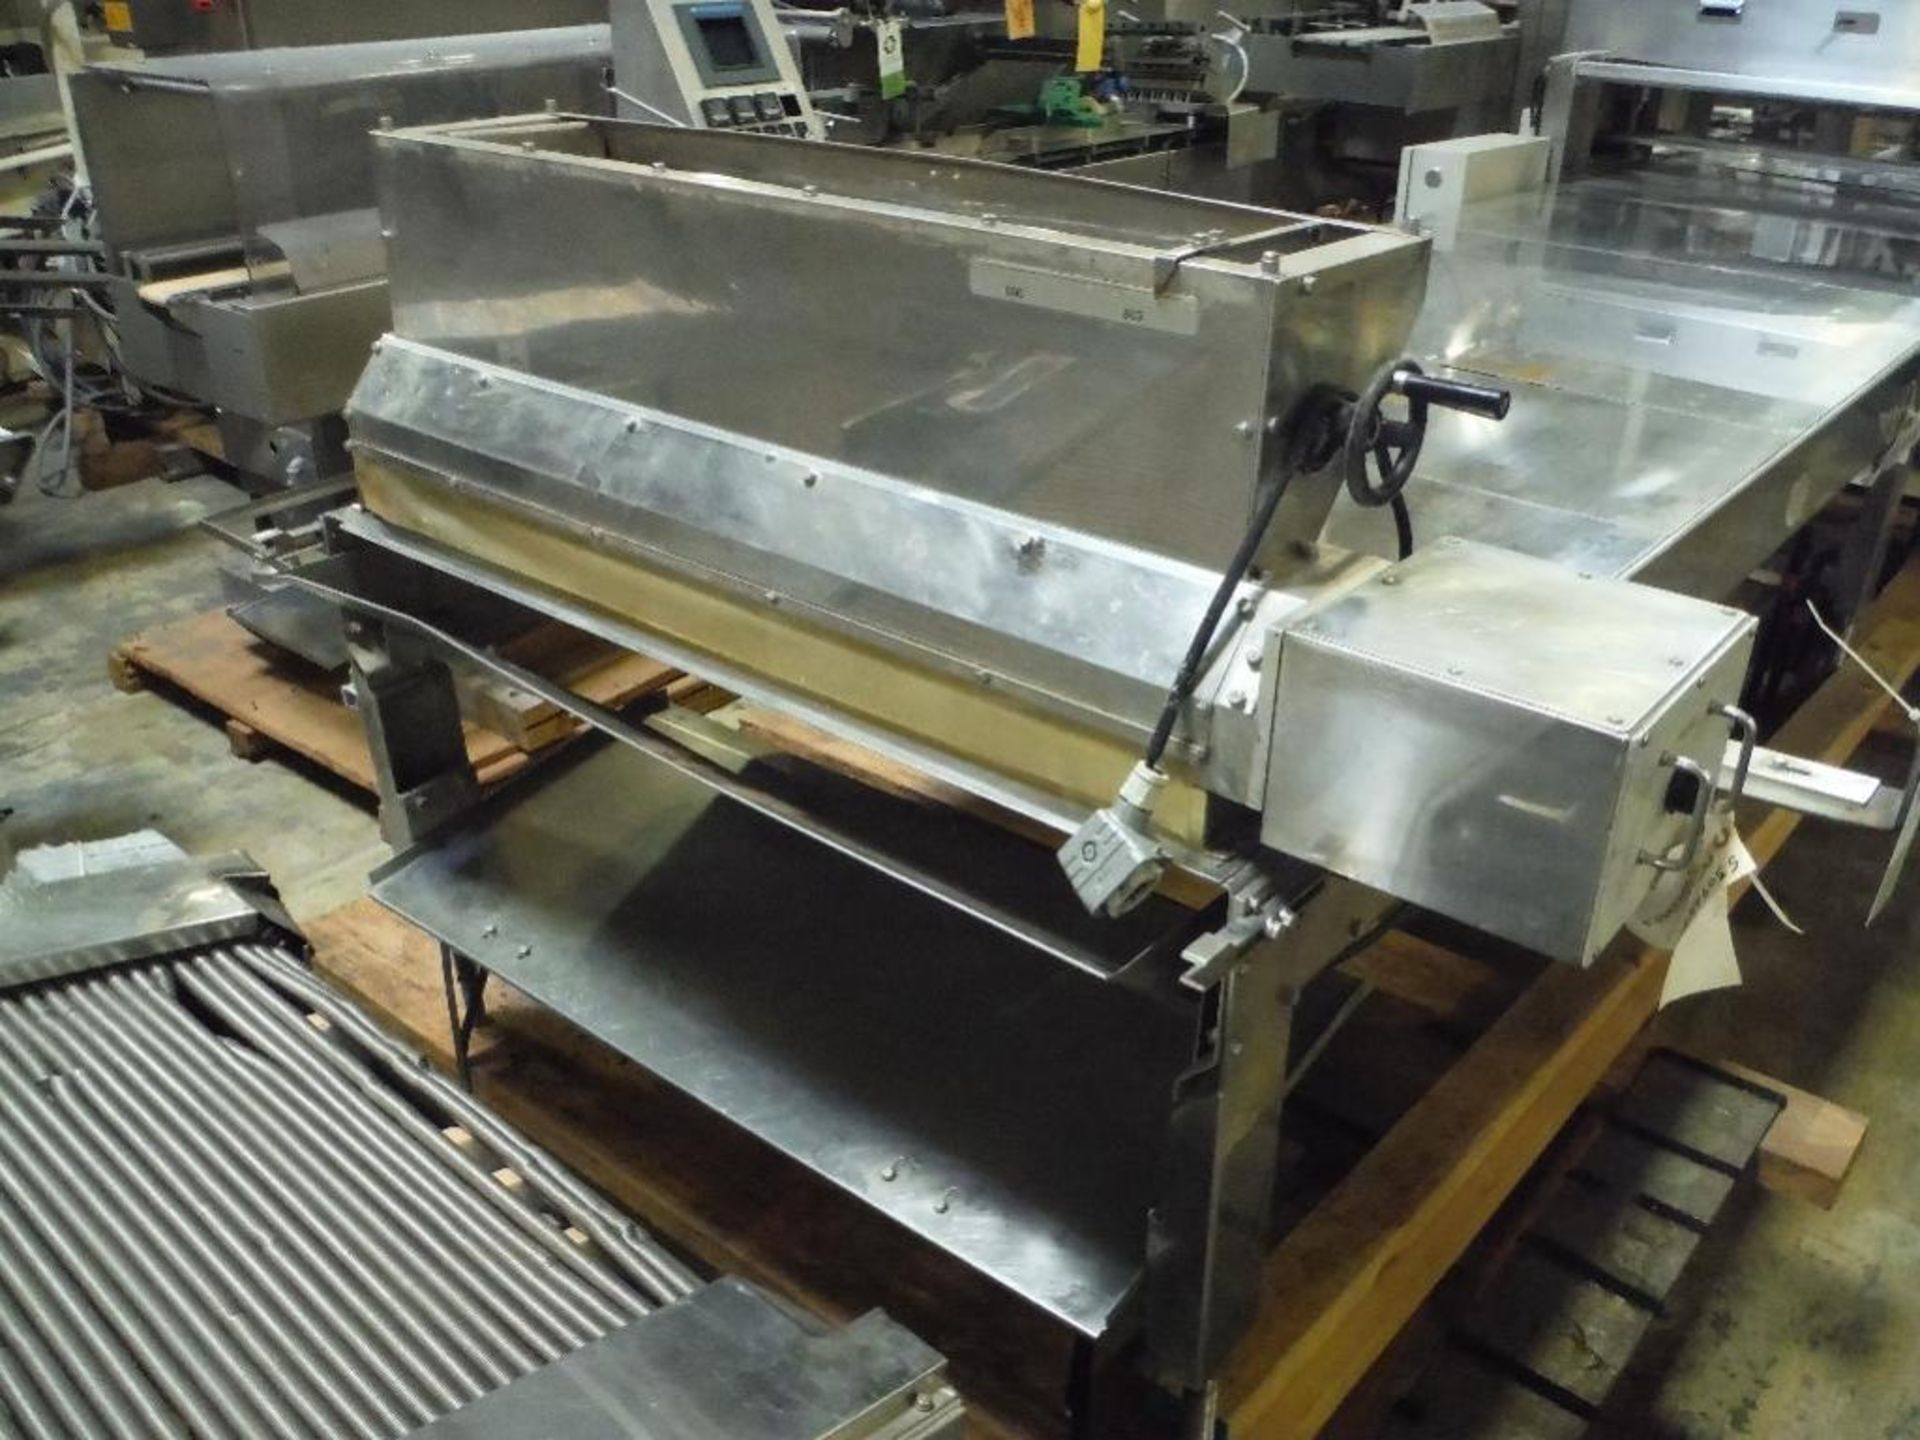 1991 Rheon sheeting conveyor, Model PC213, SN 00011, 180 in. long x 42 in. wide, with 1991 Rheon dou - Image 3 of 16